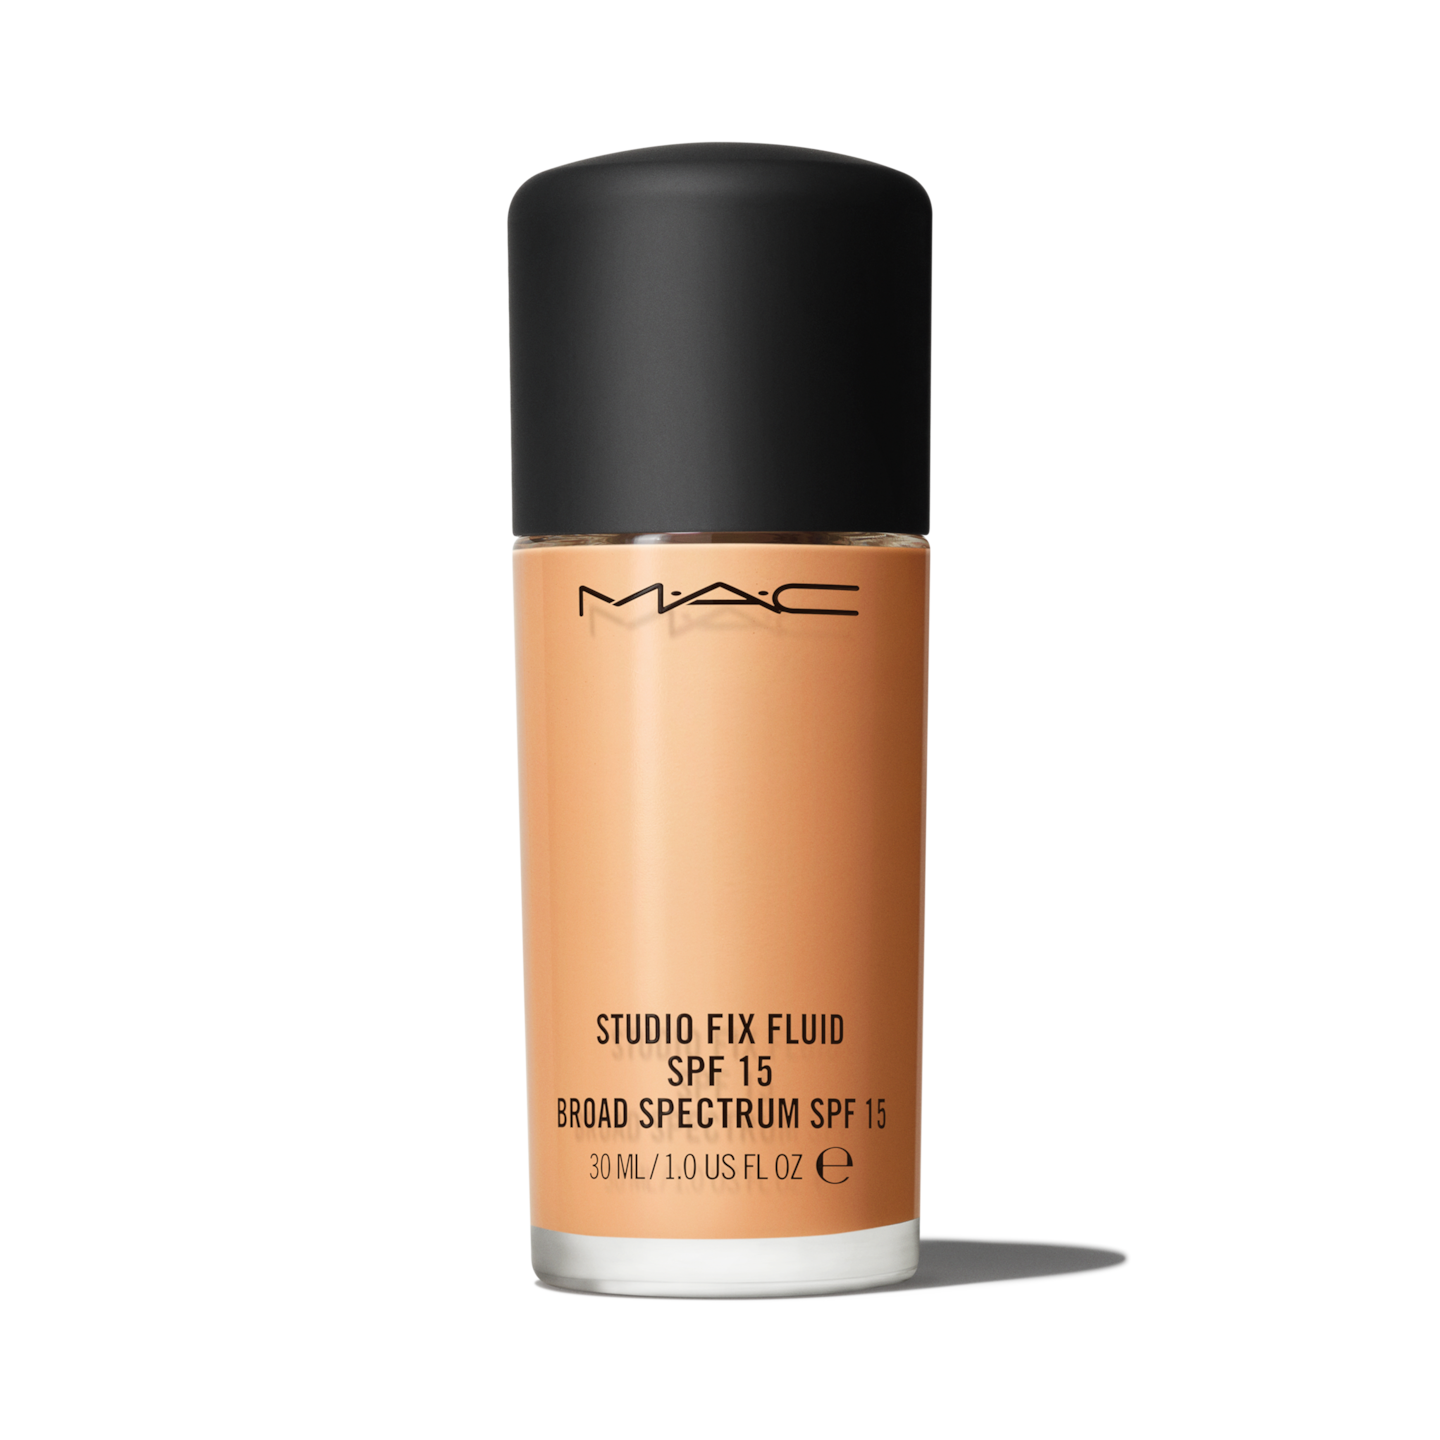 with | NC20 | Shades 63 Foundation Studio Site MAC Official Fix 15 Cosmetics - Fluid Including SPF